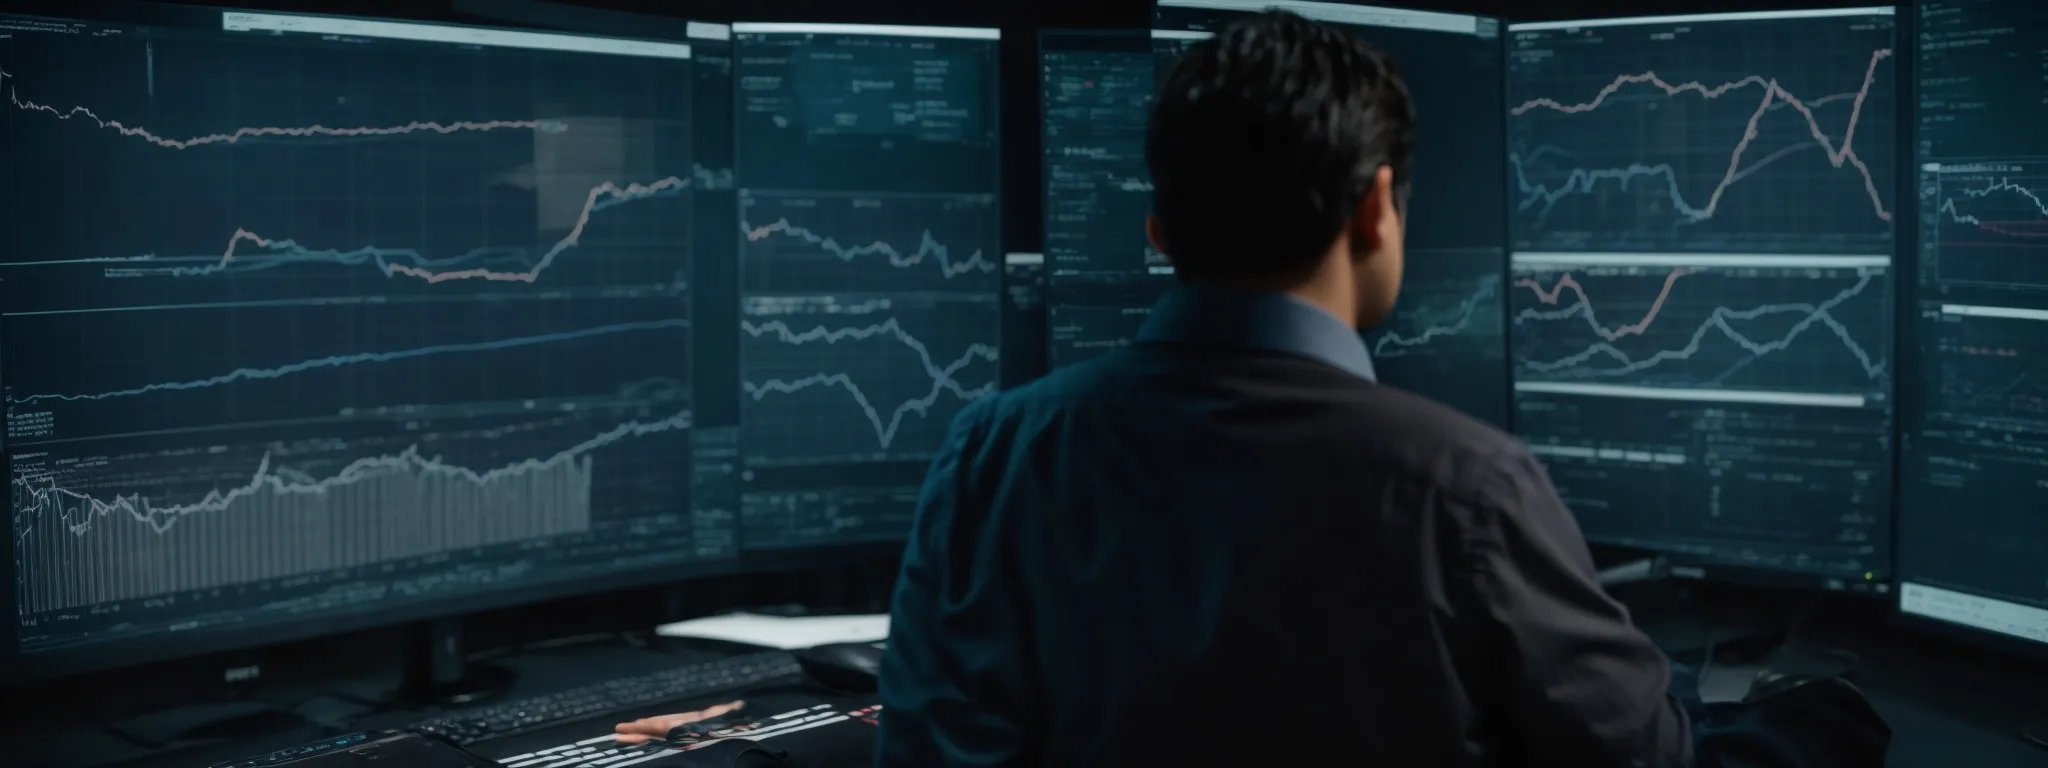 several analysts scrutinize charts and graphs on a large monitor, revealing pathways and interactions within a network.